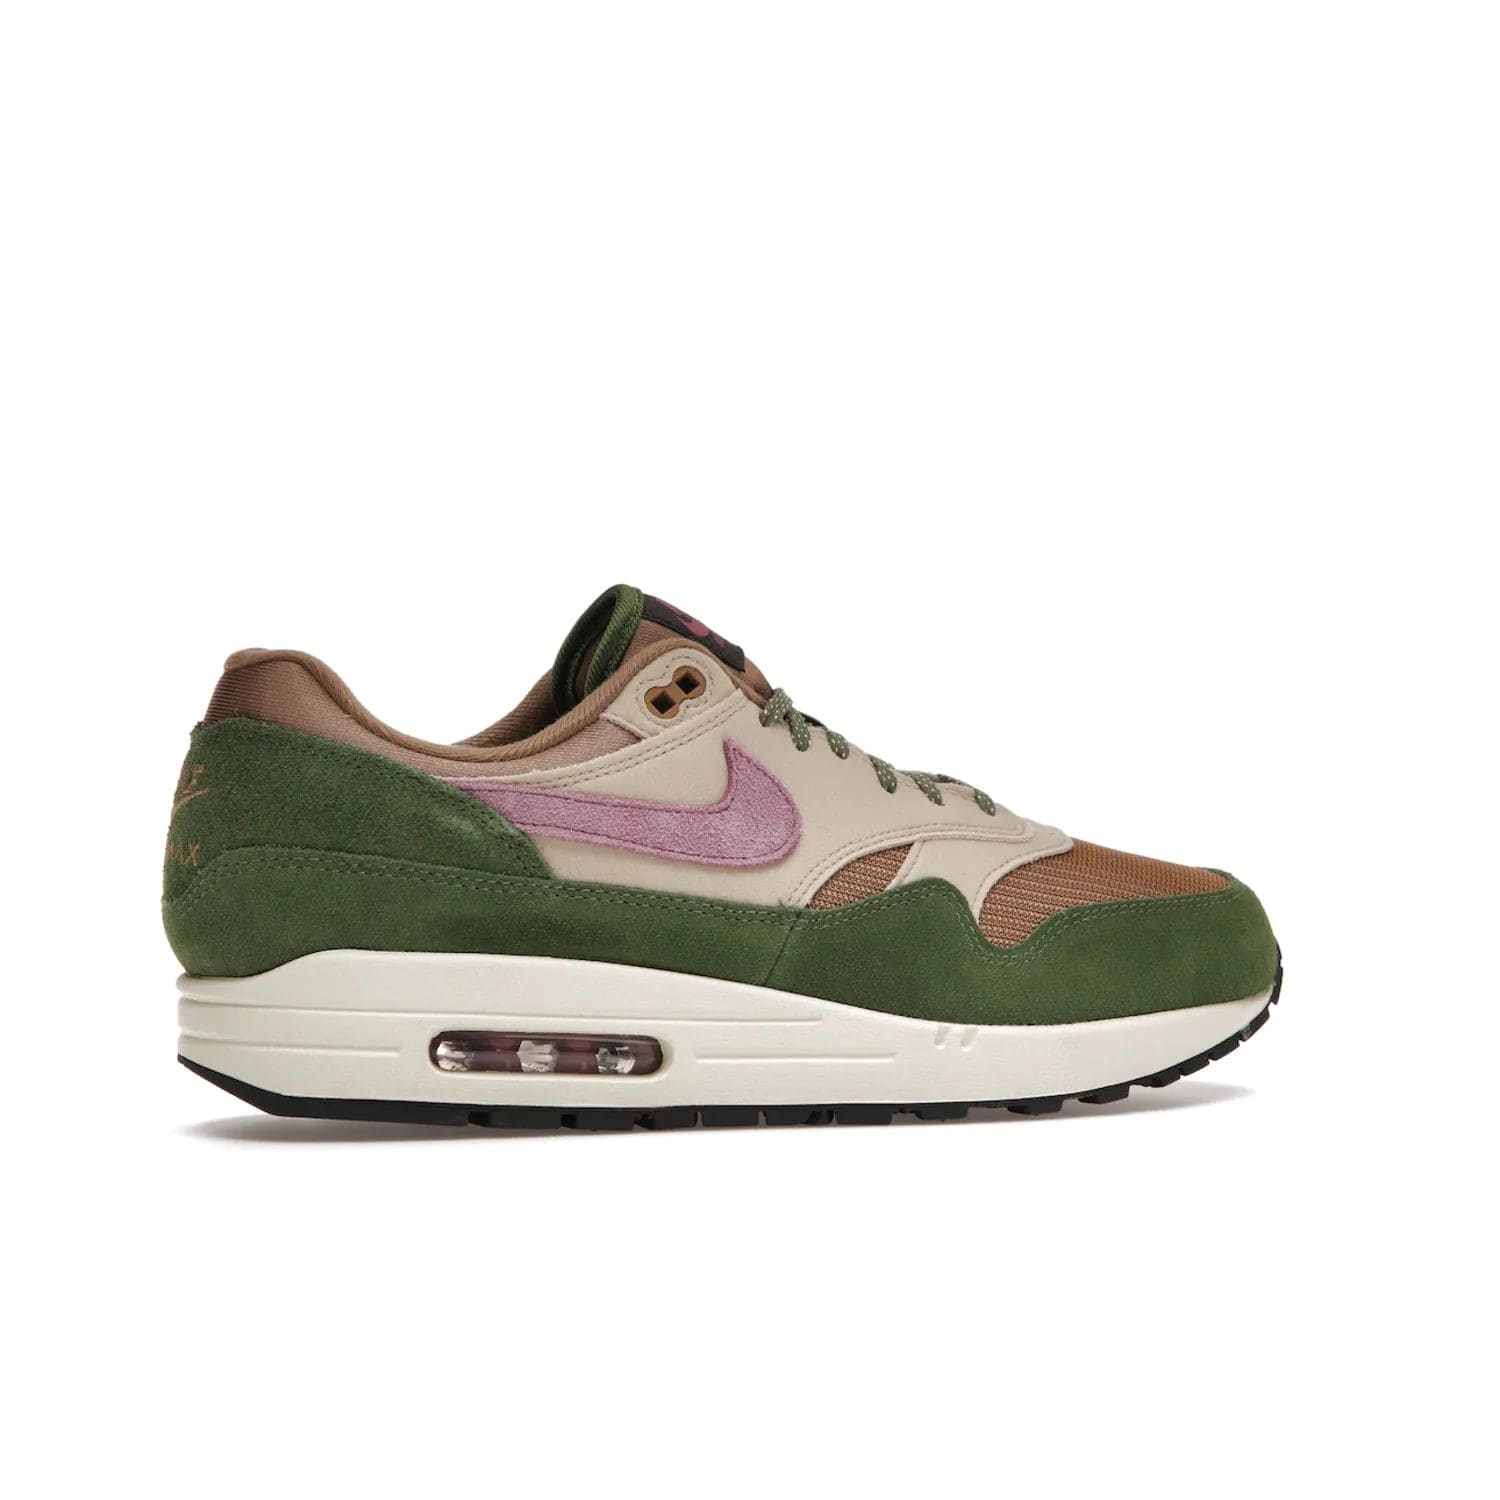 Nike Air Max 1 SH Treeline - Image 35 - Only at www.BallersClubKickz.com - A classic Nike Air Max 1 SH Treeline with a brown mesh upper, taupe Durabuck overlays, and hairy green suede details. Light Bordeaux Swoosh and woven tongue label for a pop of color. Released in May 2022. Perfect for any outfit and sure to impress.